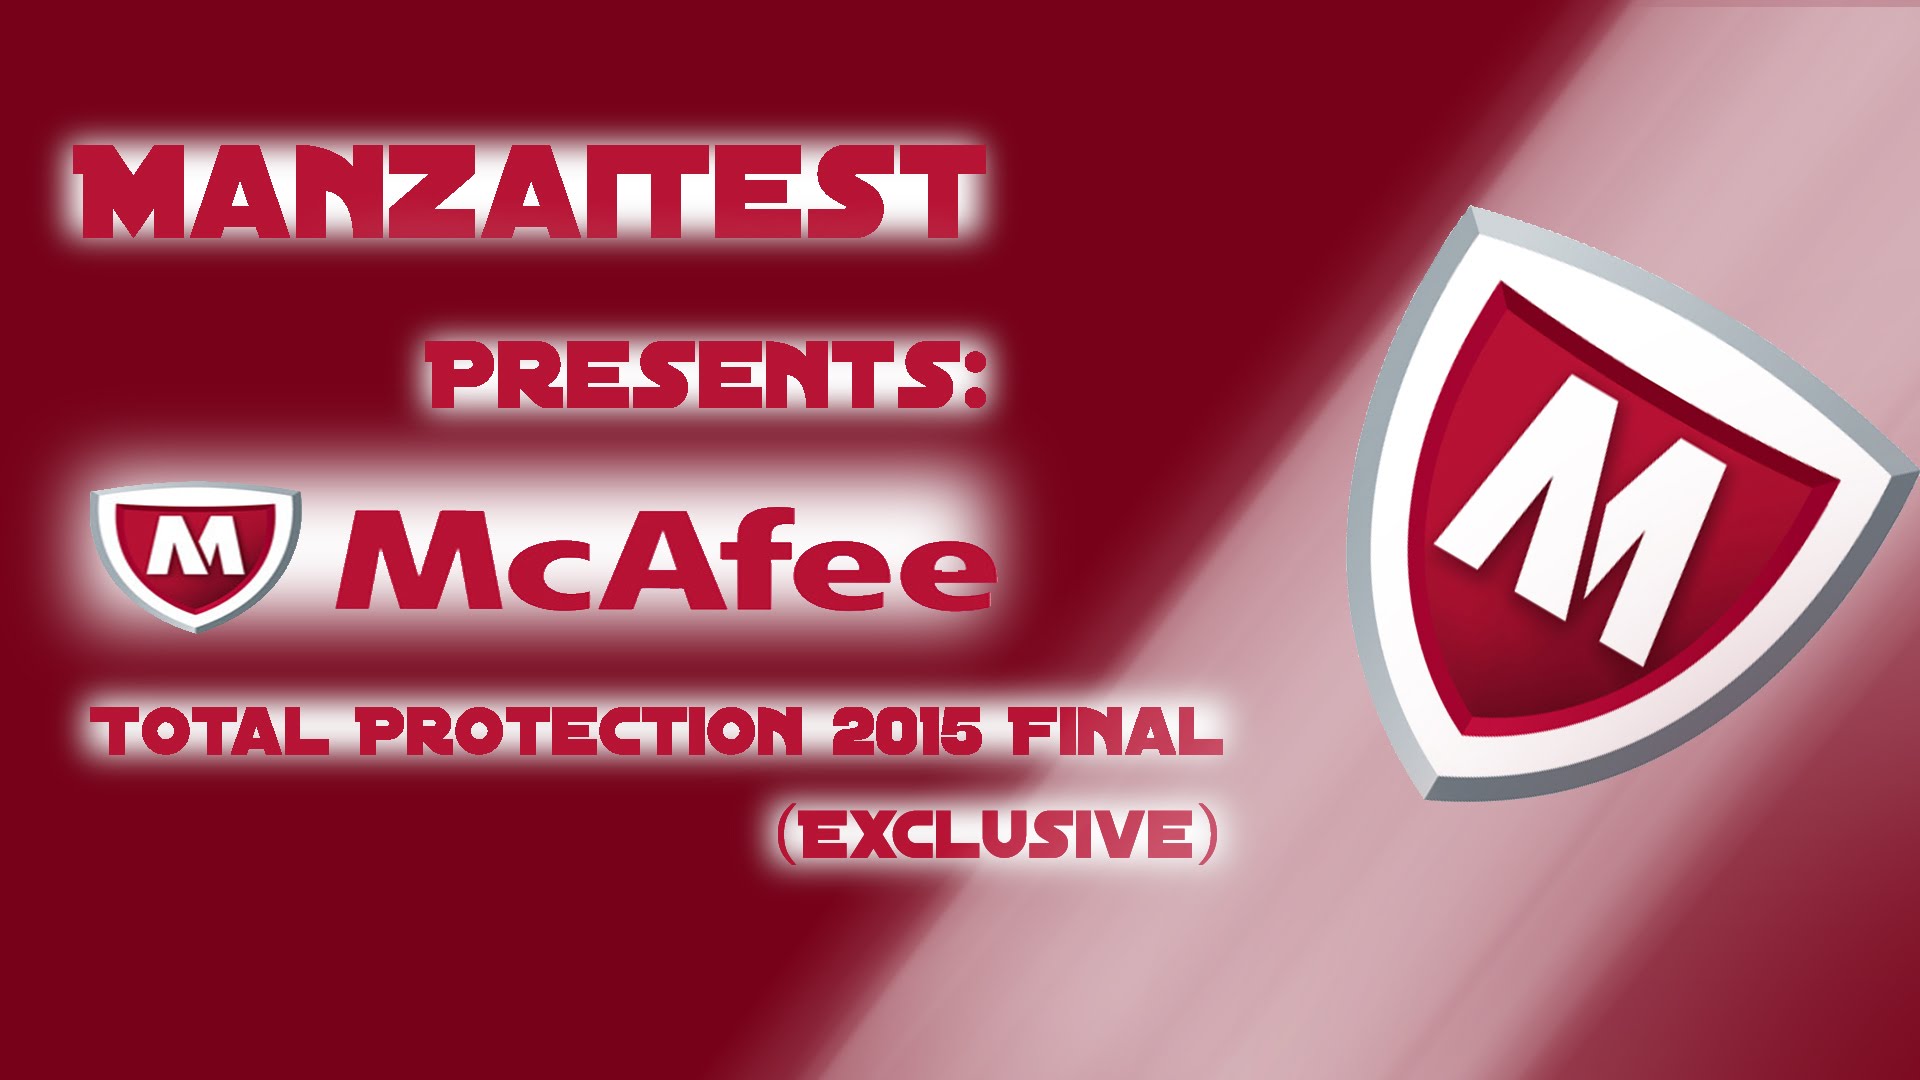 Exclusive - Test Musical] McAfee Total Protection 2015 Final - YouTube